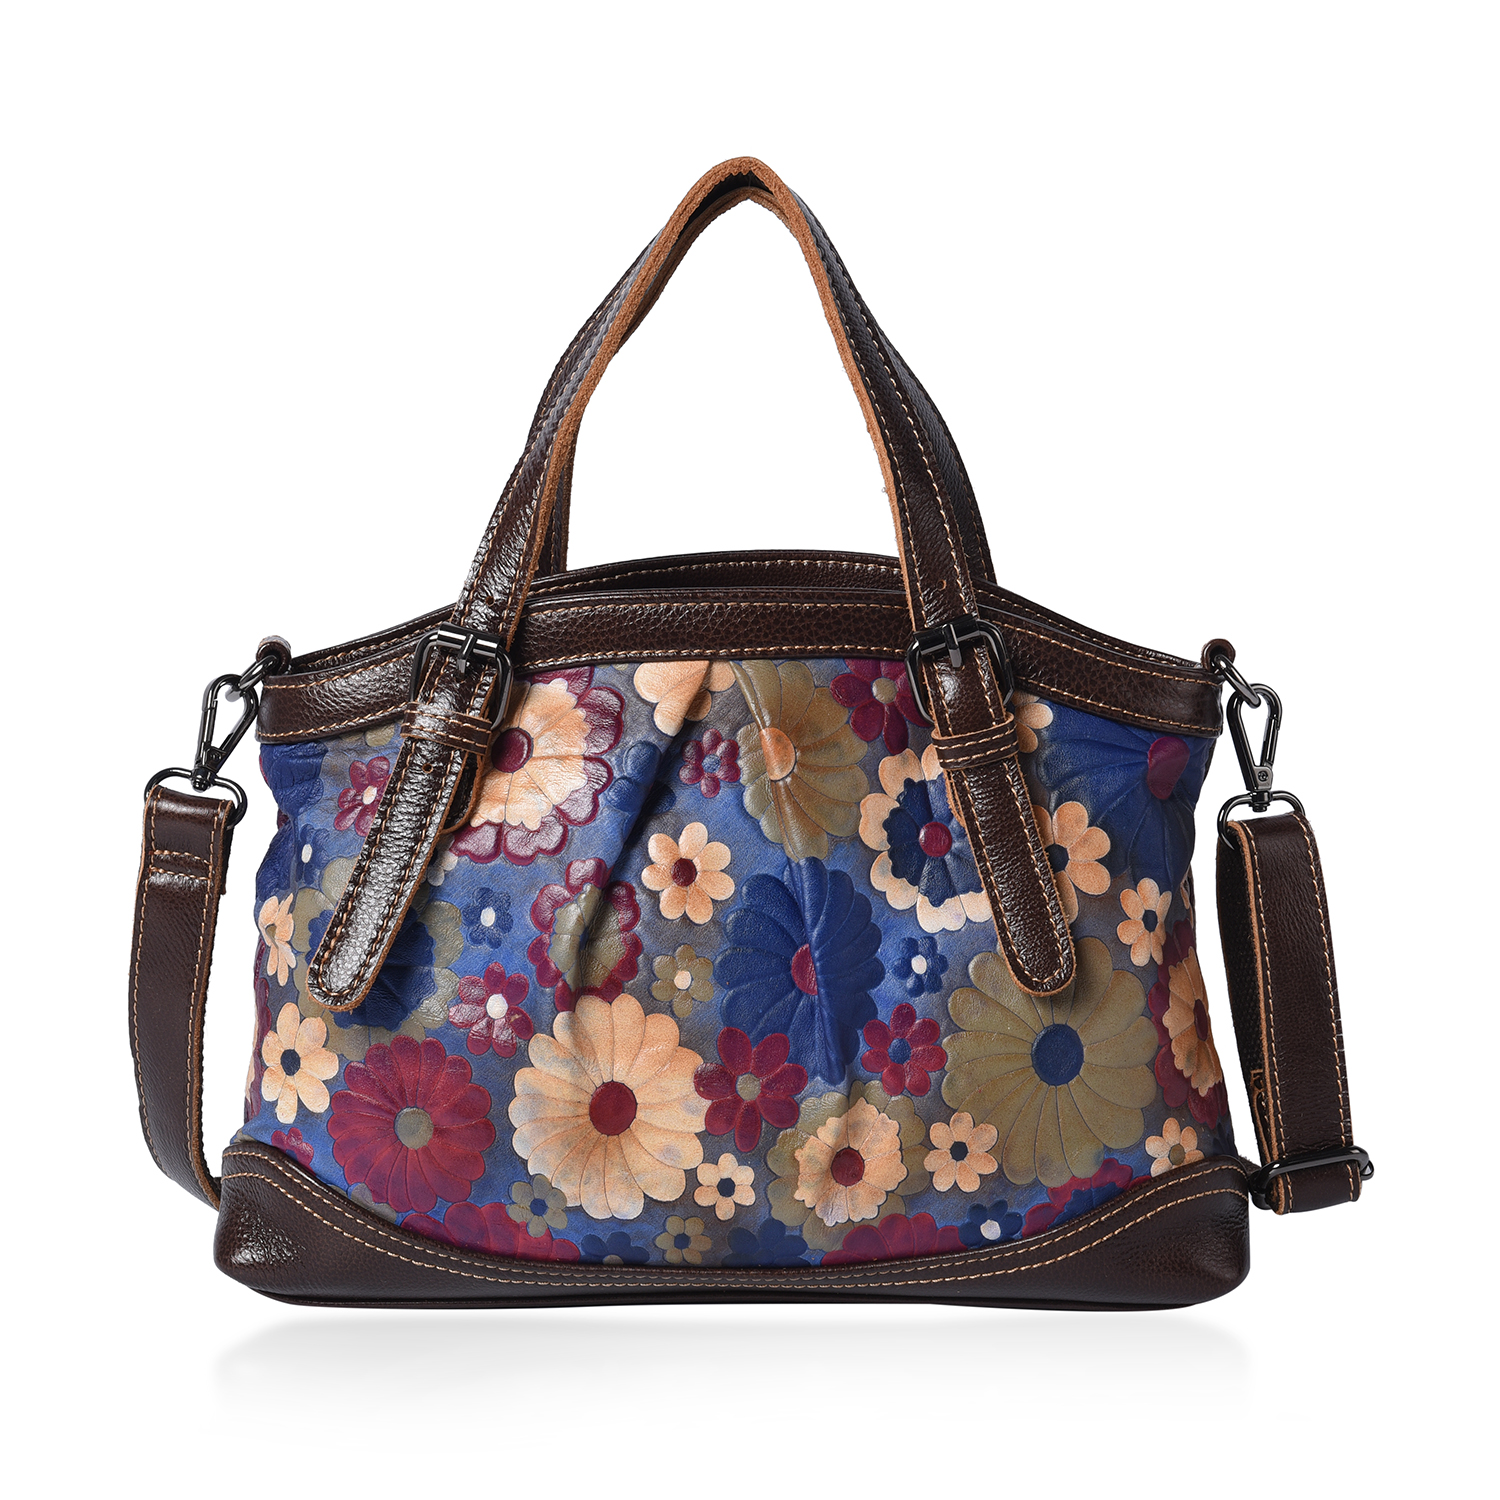 100% Genuine Leather Embossed Floral Pattern Satchel Bag (Siz3 31x9x21cm) - Blue and Multi Colour